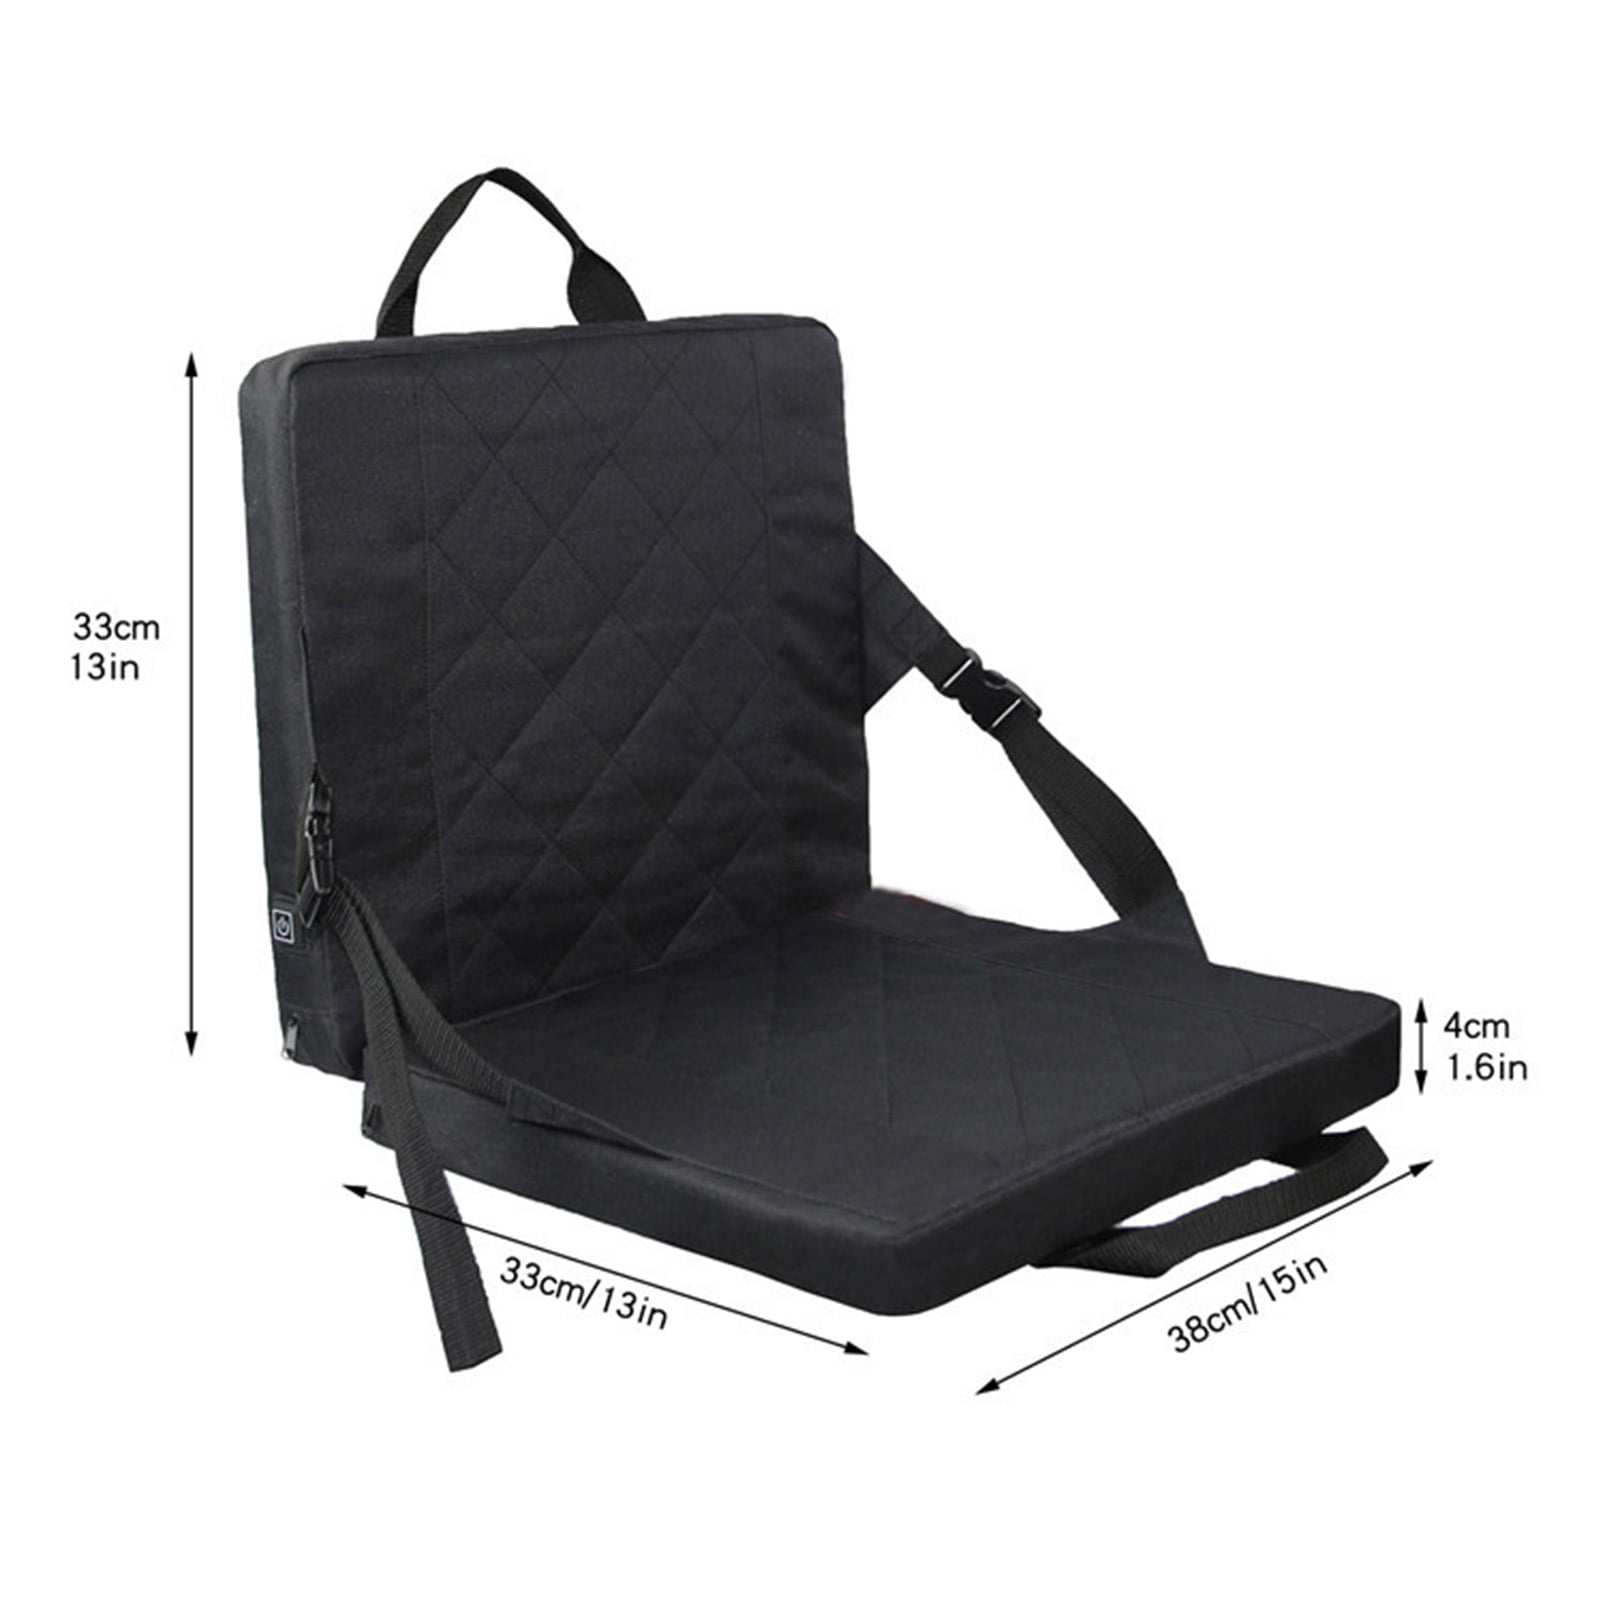 HGUIM Portable Heated Seat Cushion Pad Hunting Seat Cushion Heated USB  Power with 3 Levels Fast Heating Warm Seat Pads for Office Park Boat  Stadium